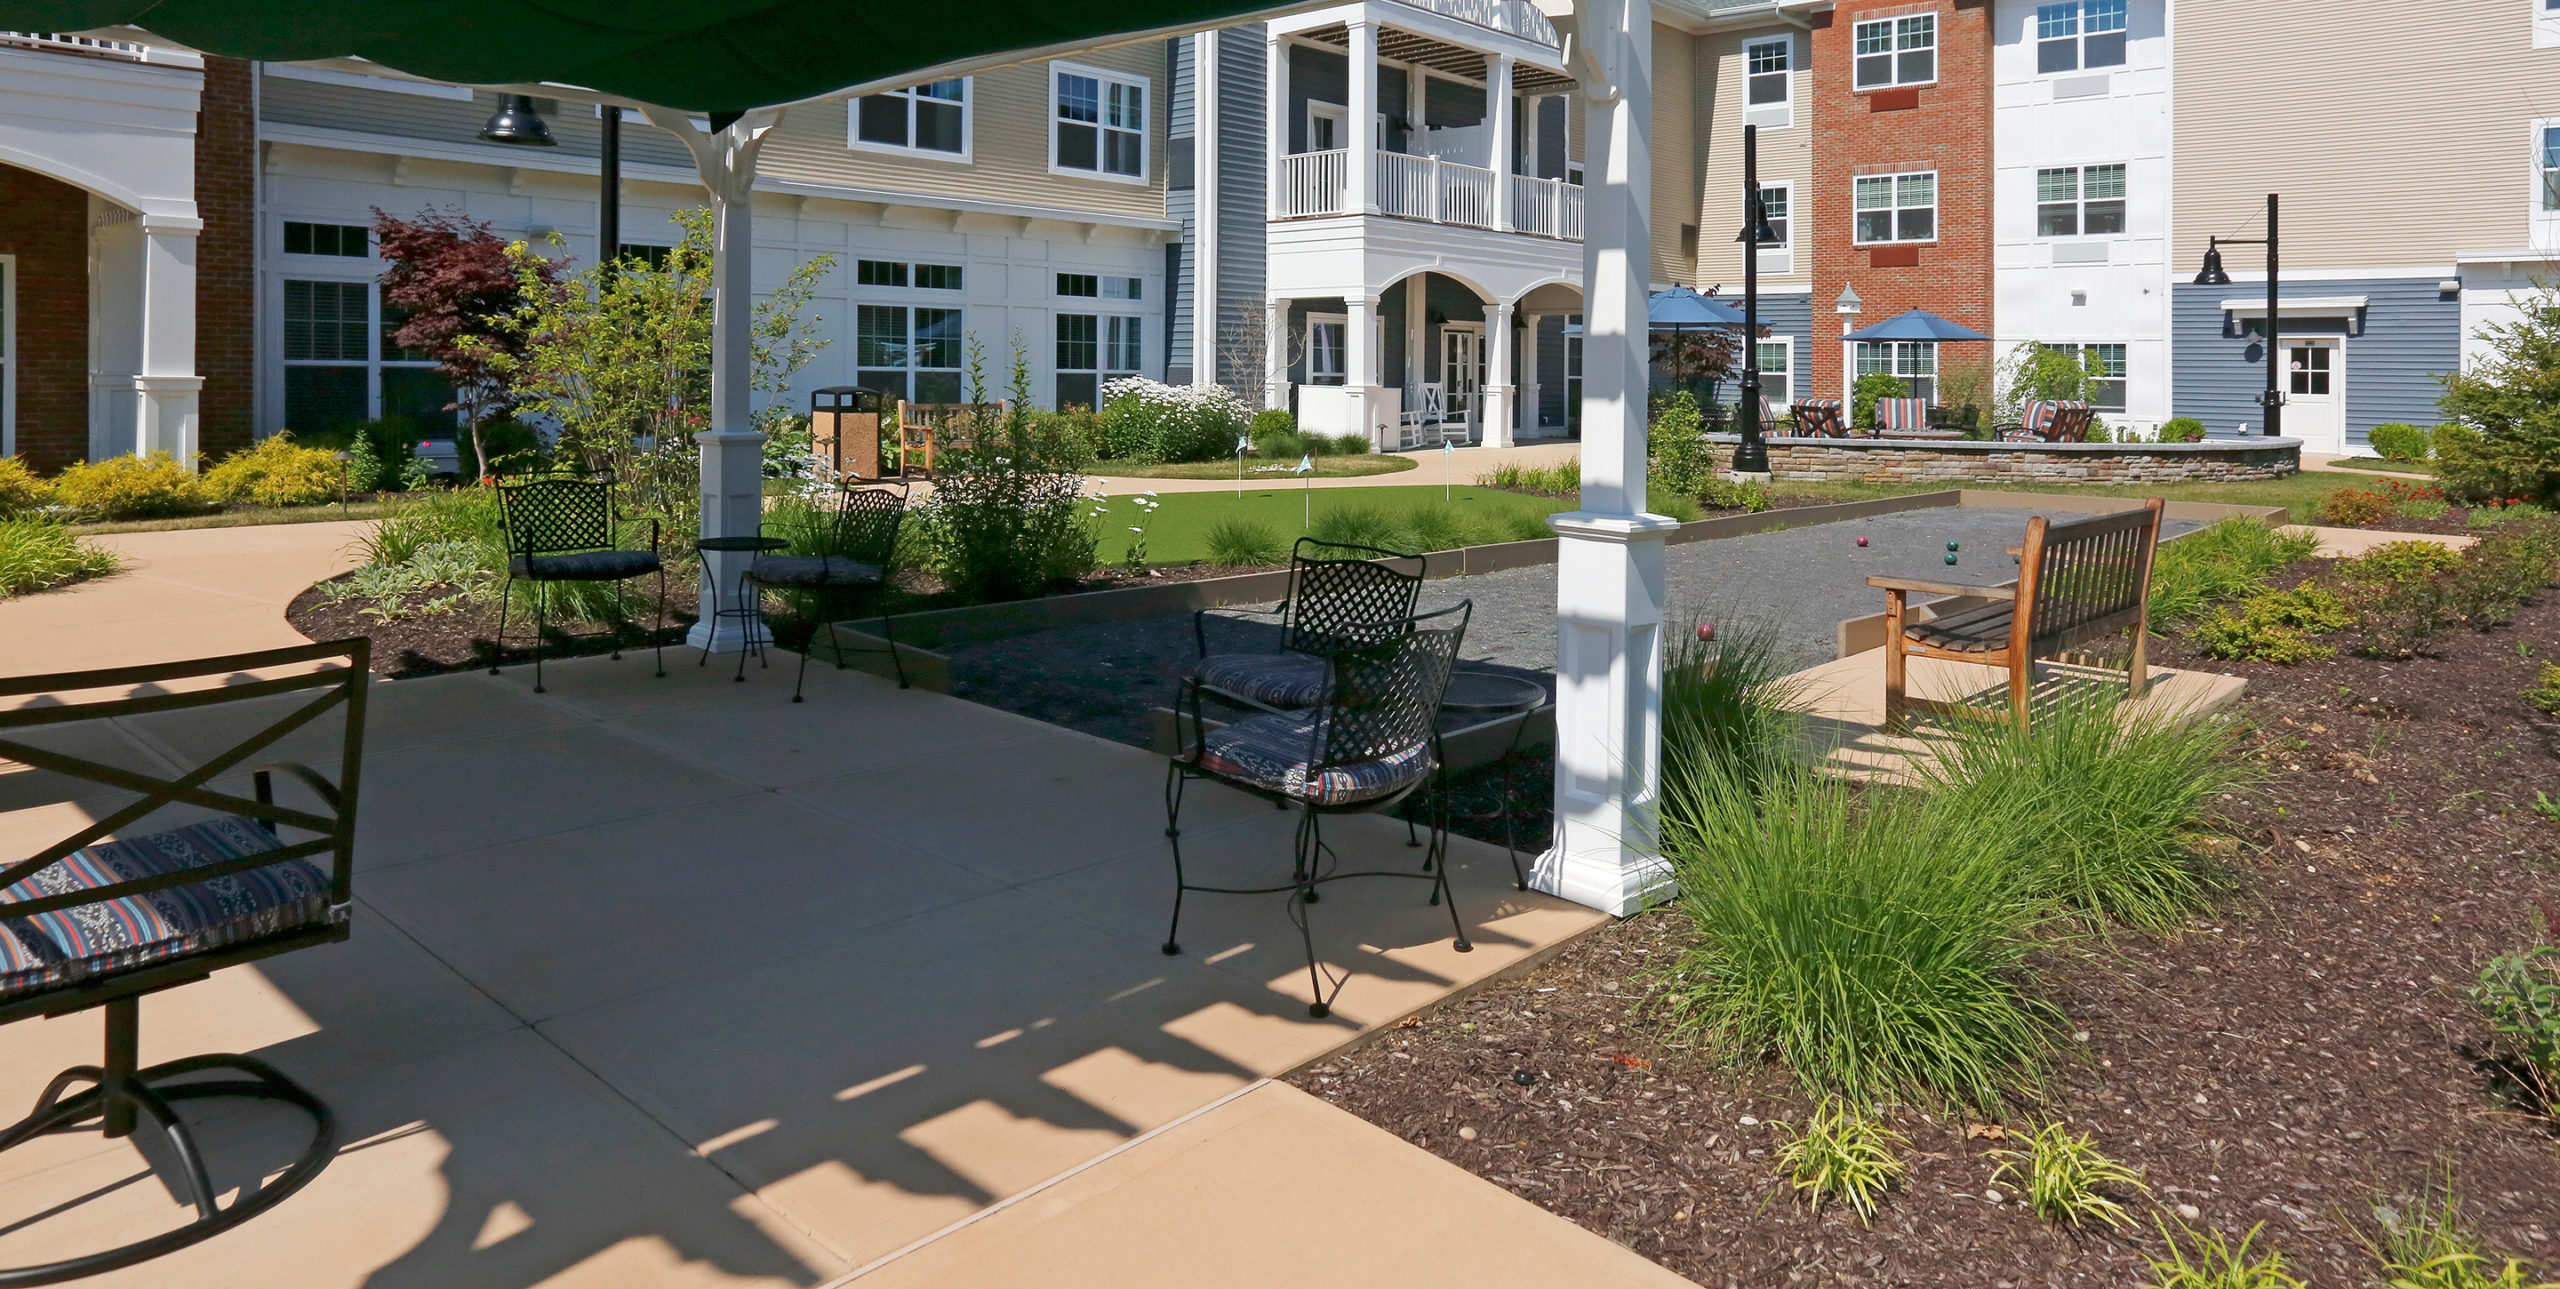 Bocce court at Brightview Senior Living in Sayville, NY